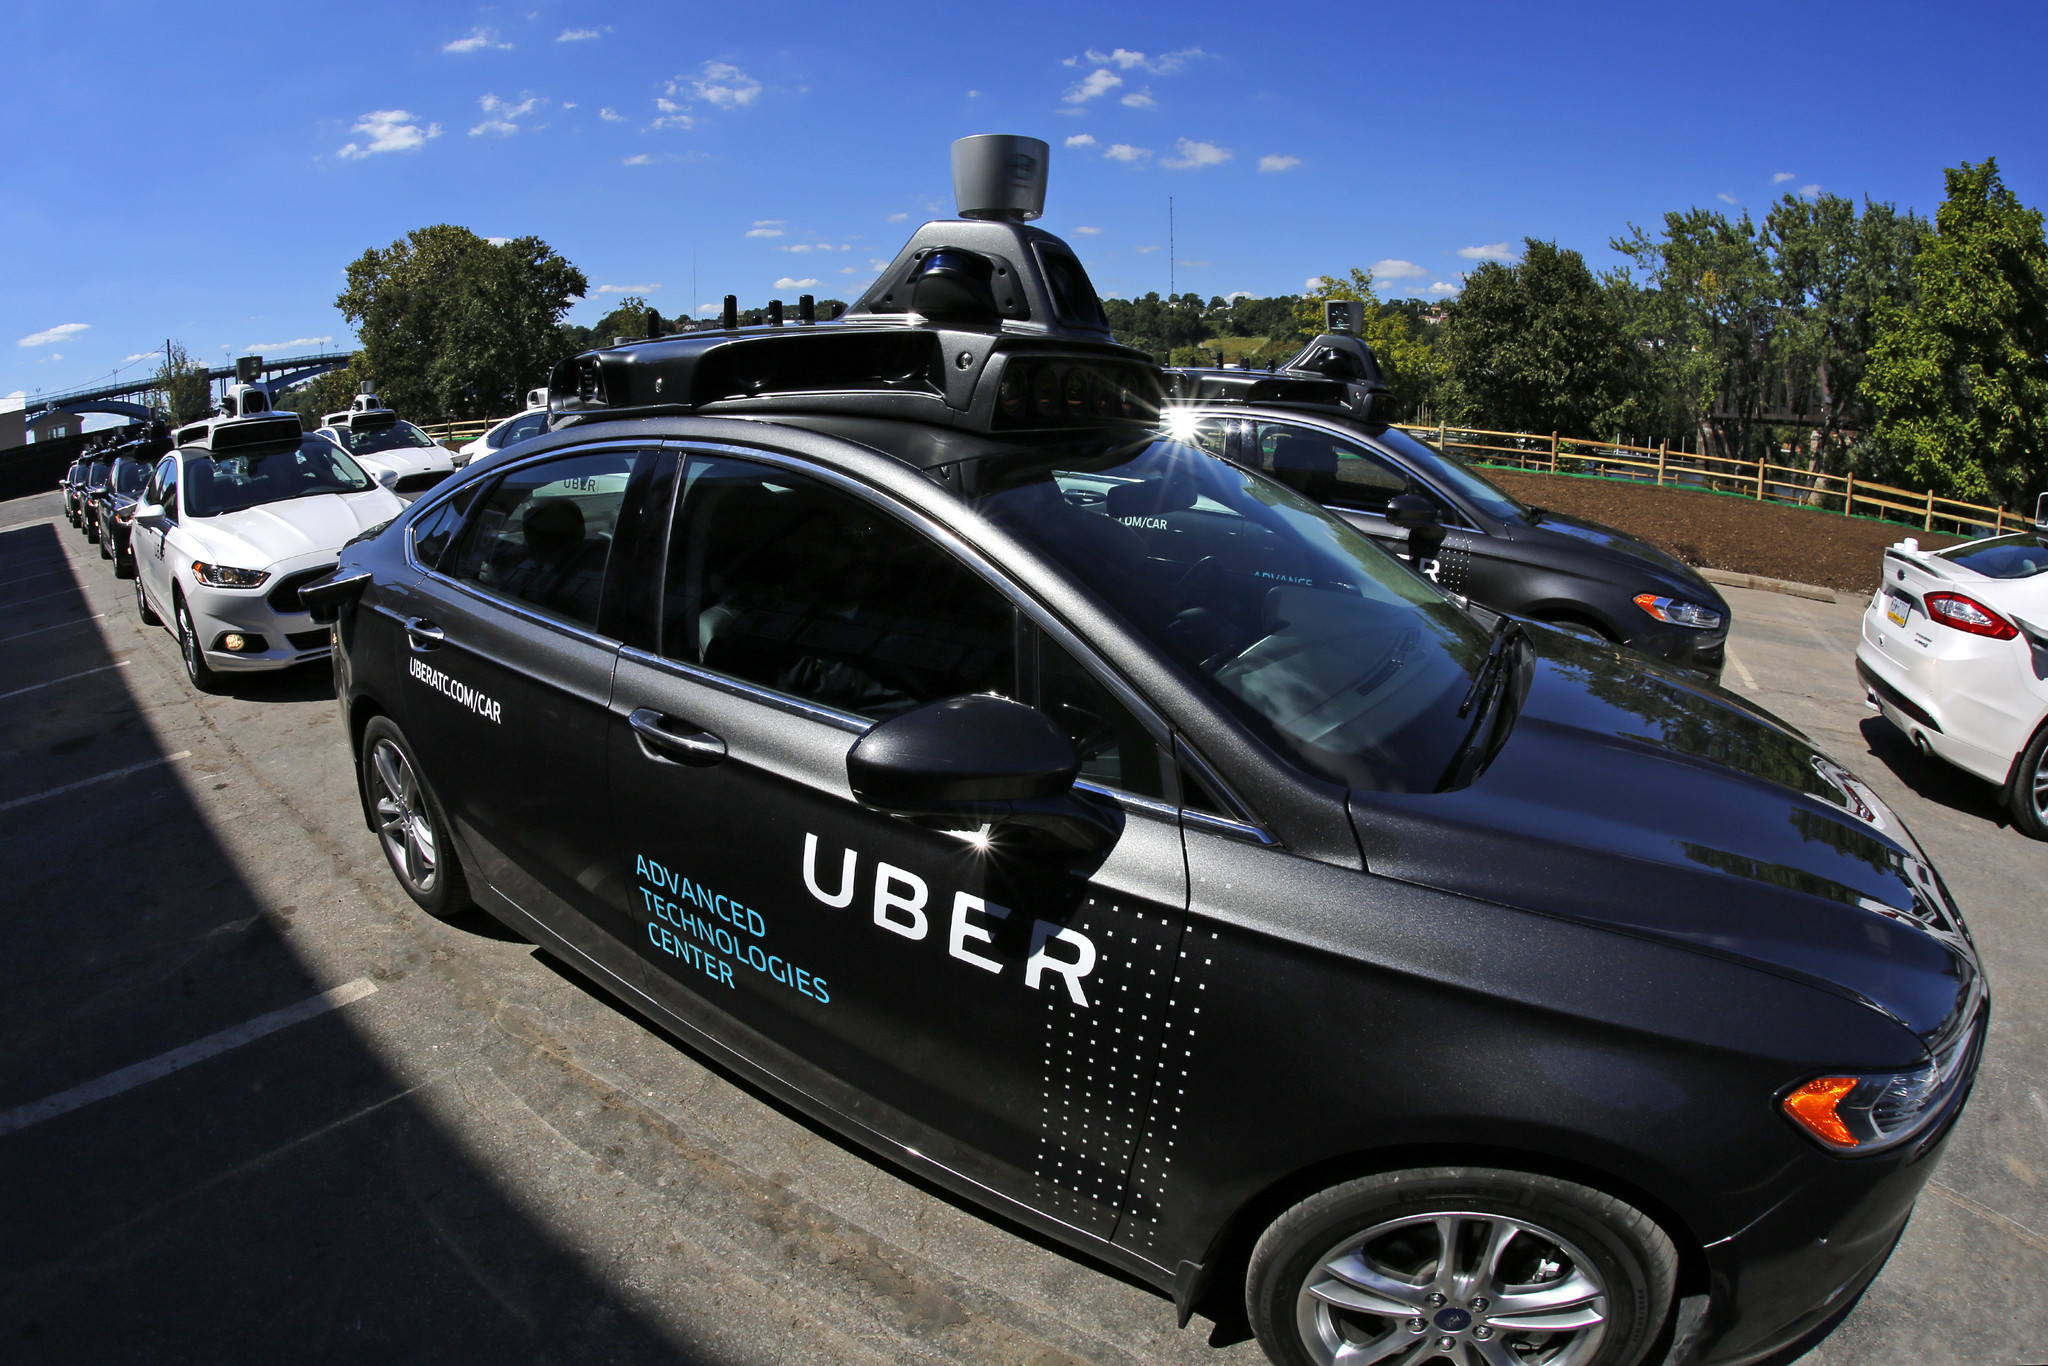 Uber's self-driving car: Prepare to be thrilled and bored at the same